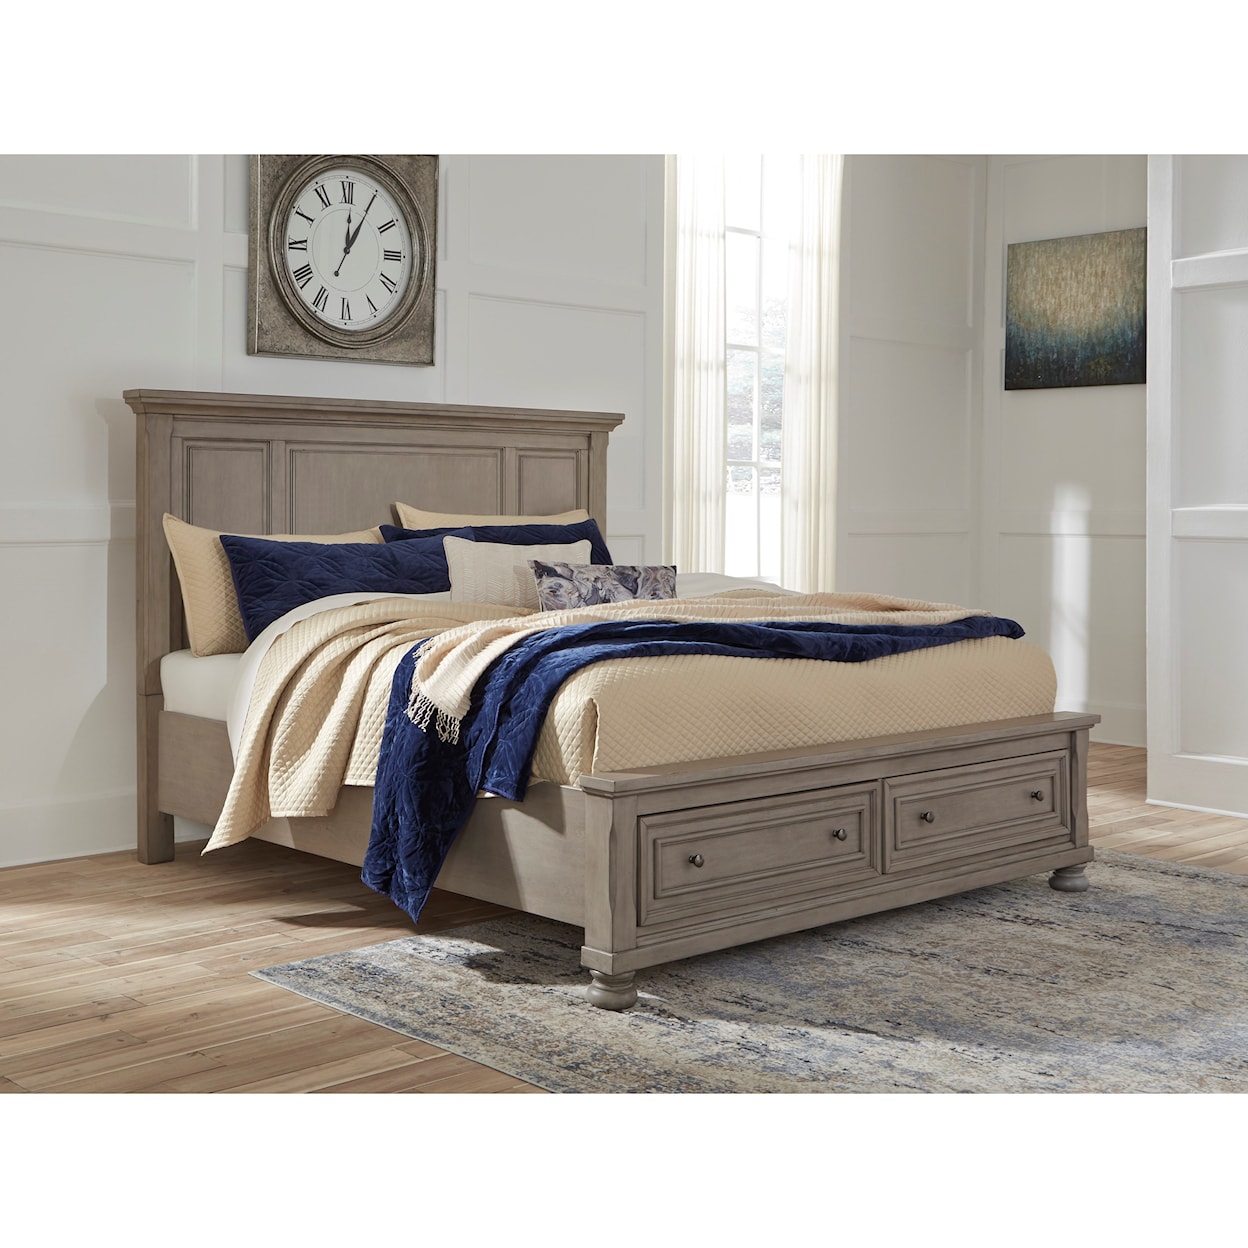 Ashley Furniture Signature Design Lettner Cal King Panel Bed with Storage Footboard